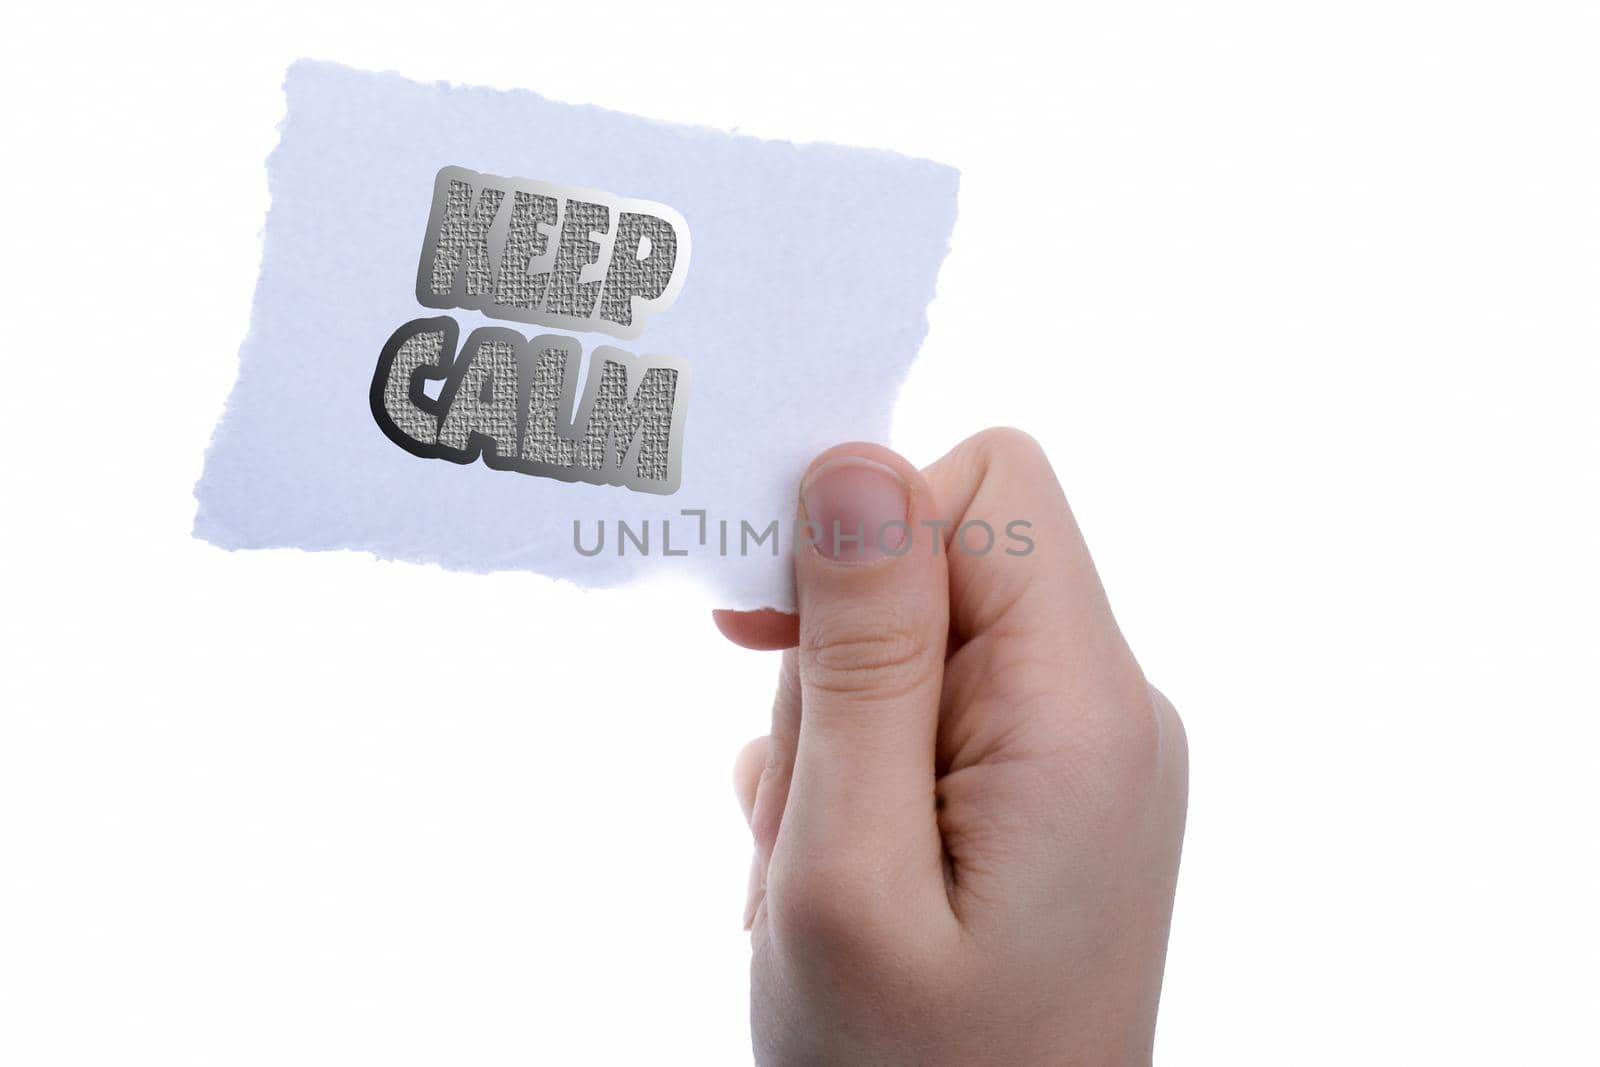 Keep calm wording hand holding a piece of blank torn notepaper